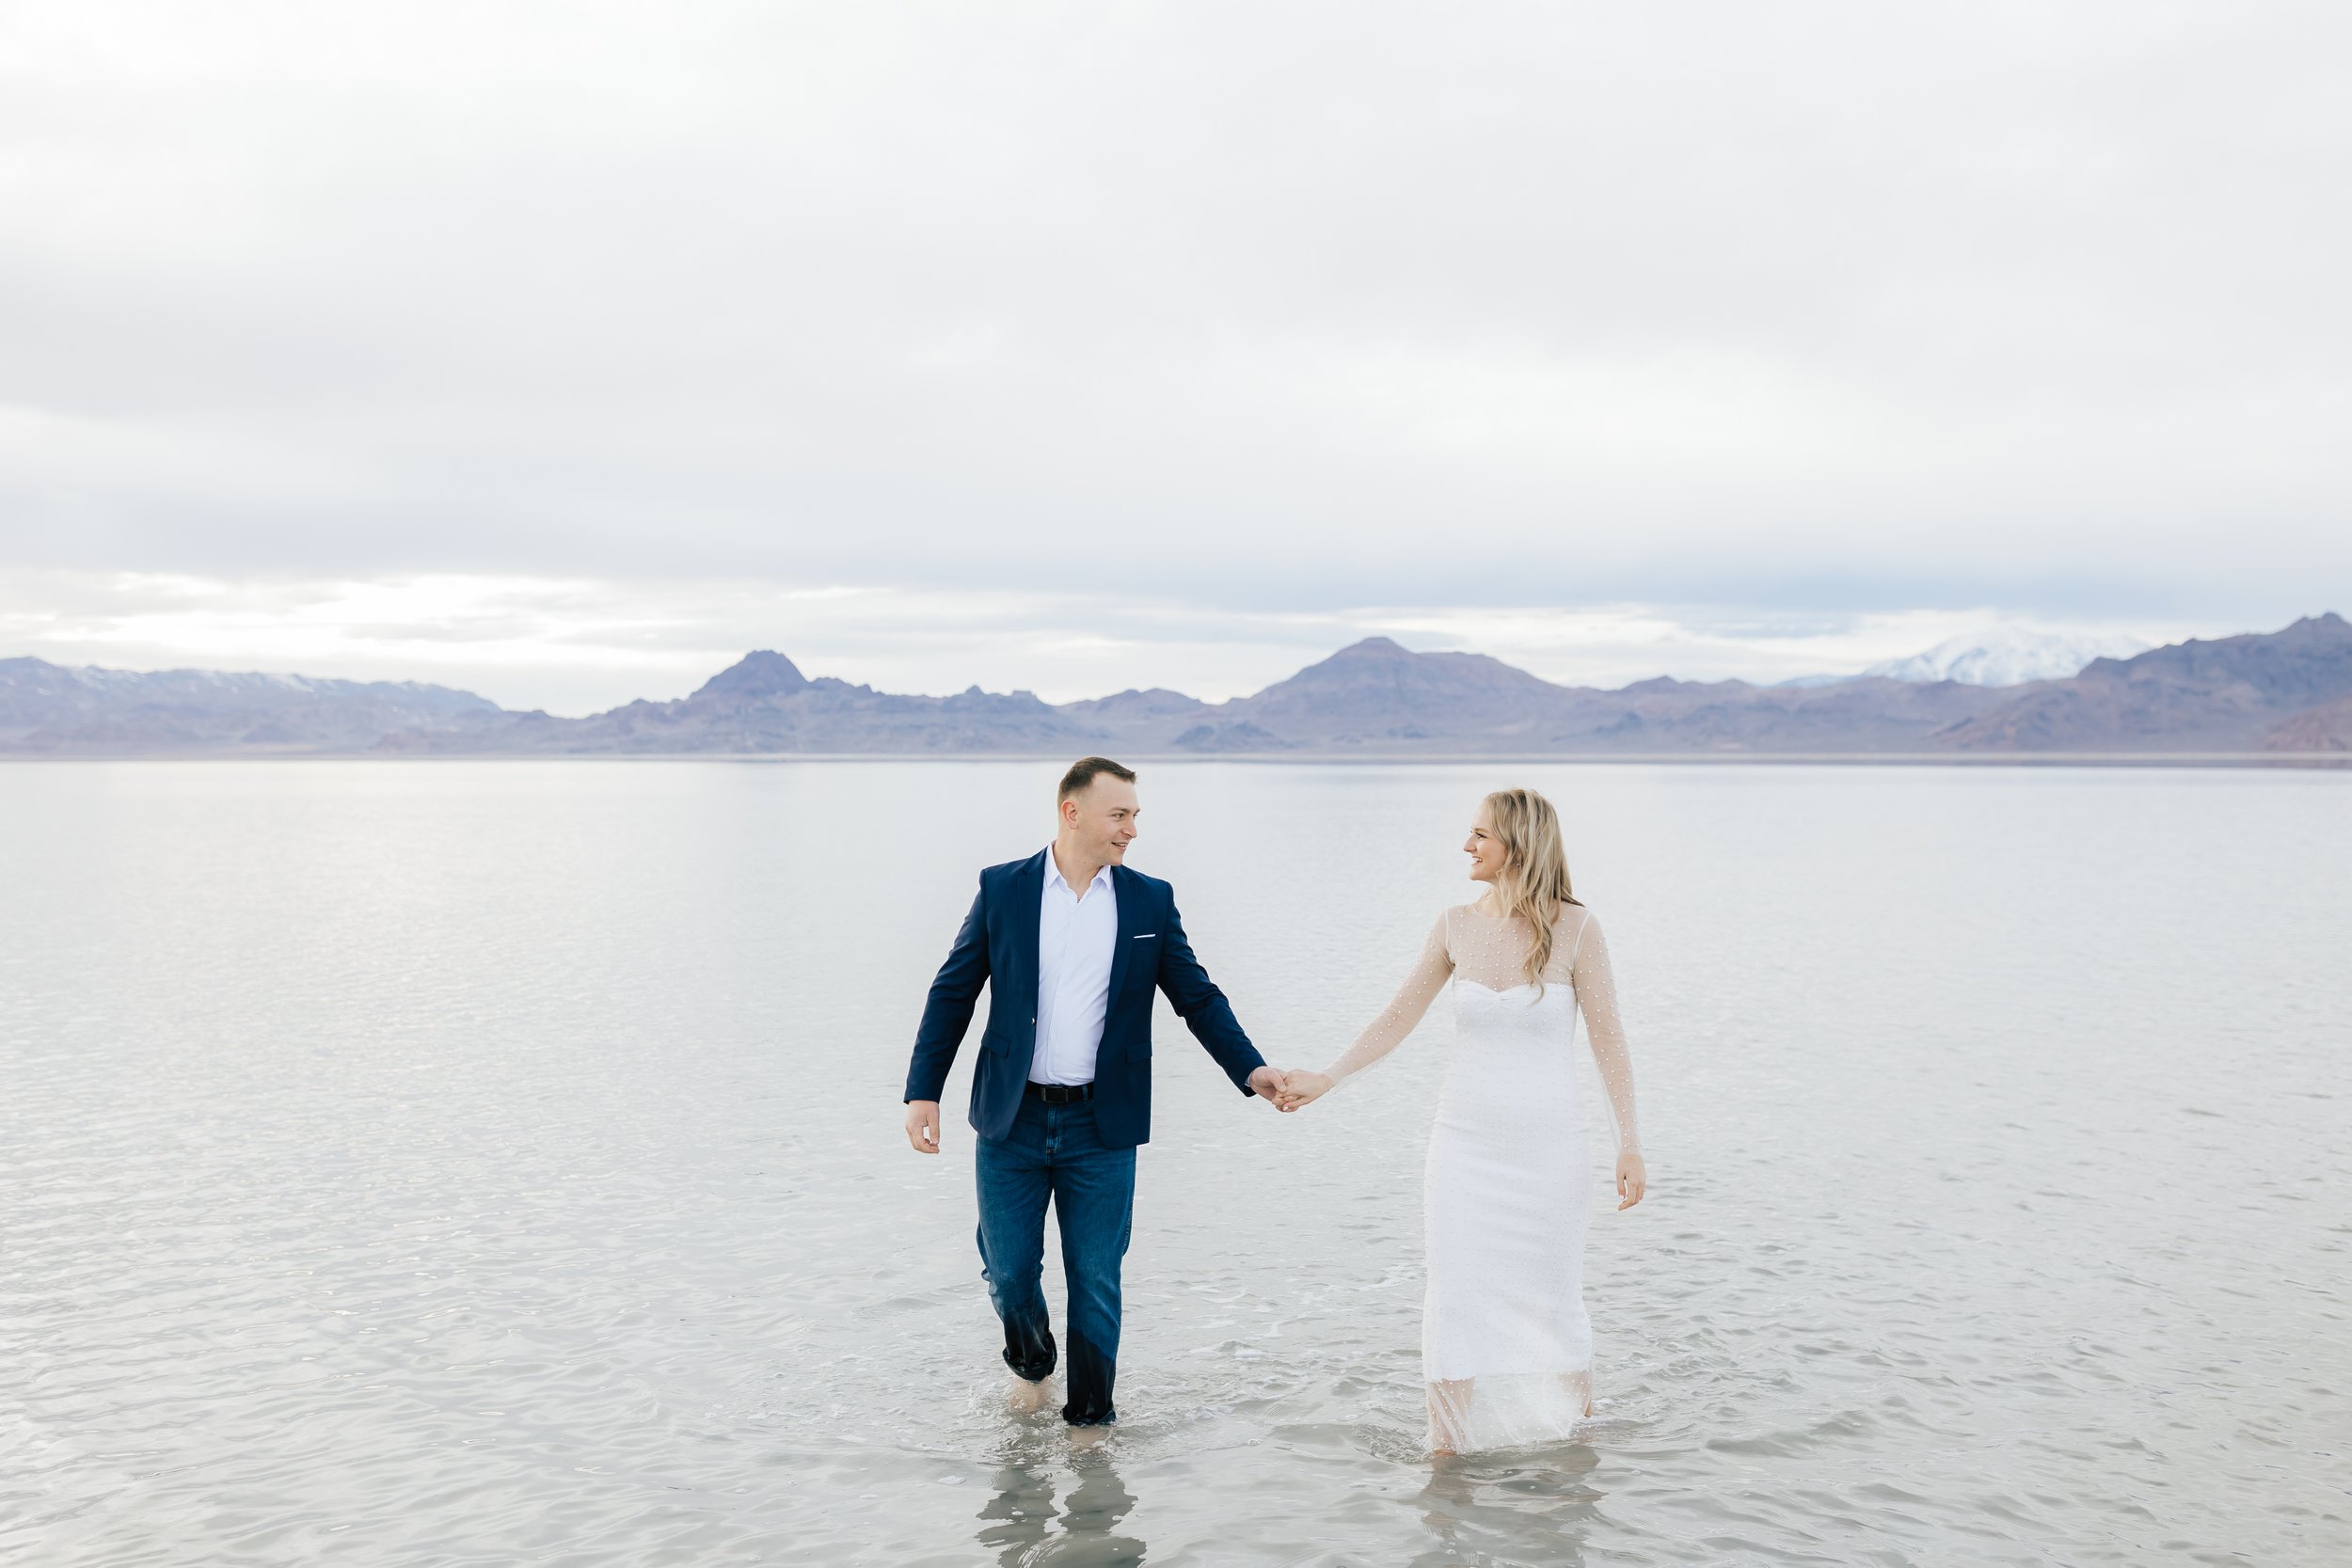  Soon-to-be husband and wife hold hands walking at Bonneville Salt Flats in the springtime by Emily Jenkins Photography. summer engagements in UT summer outfits #EmilyJenkinsPhotography #EmilyJenkinsEngagements #BonnevilleSaltFlats #SaltFlatEngagemen